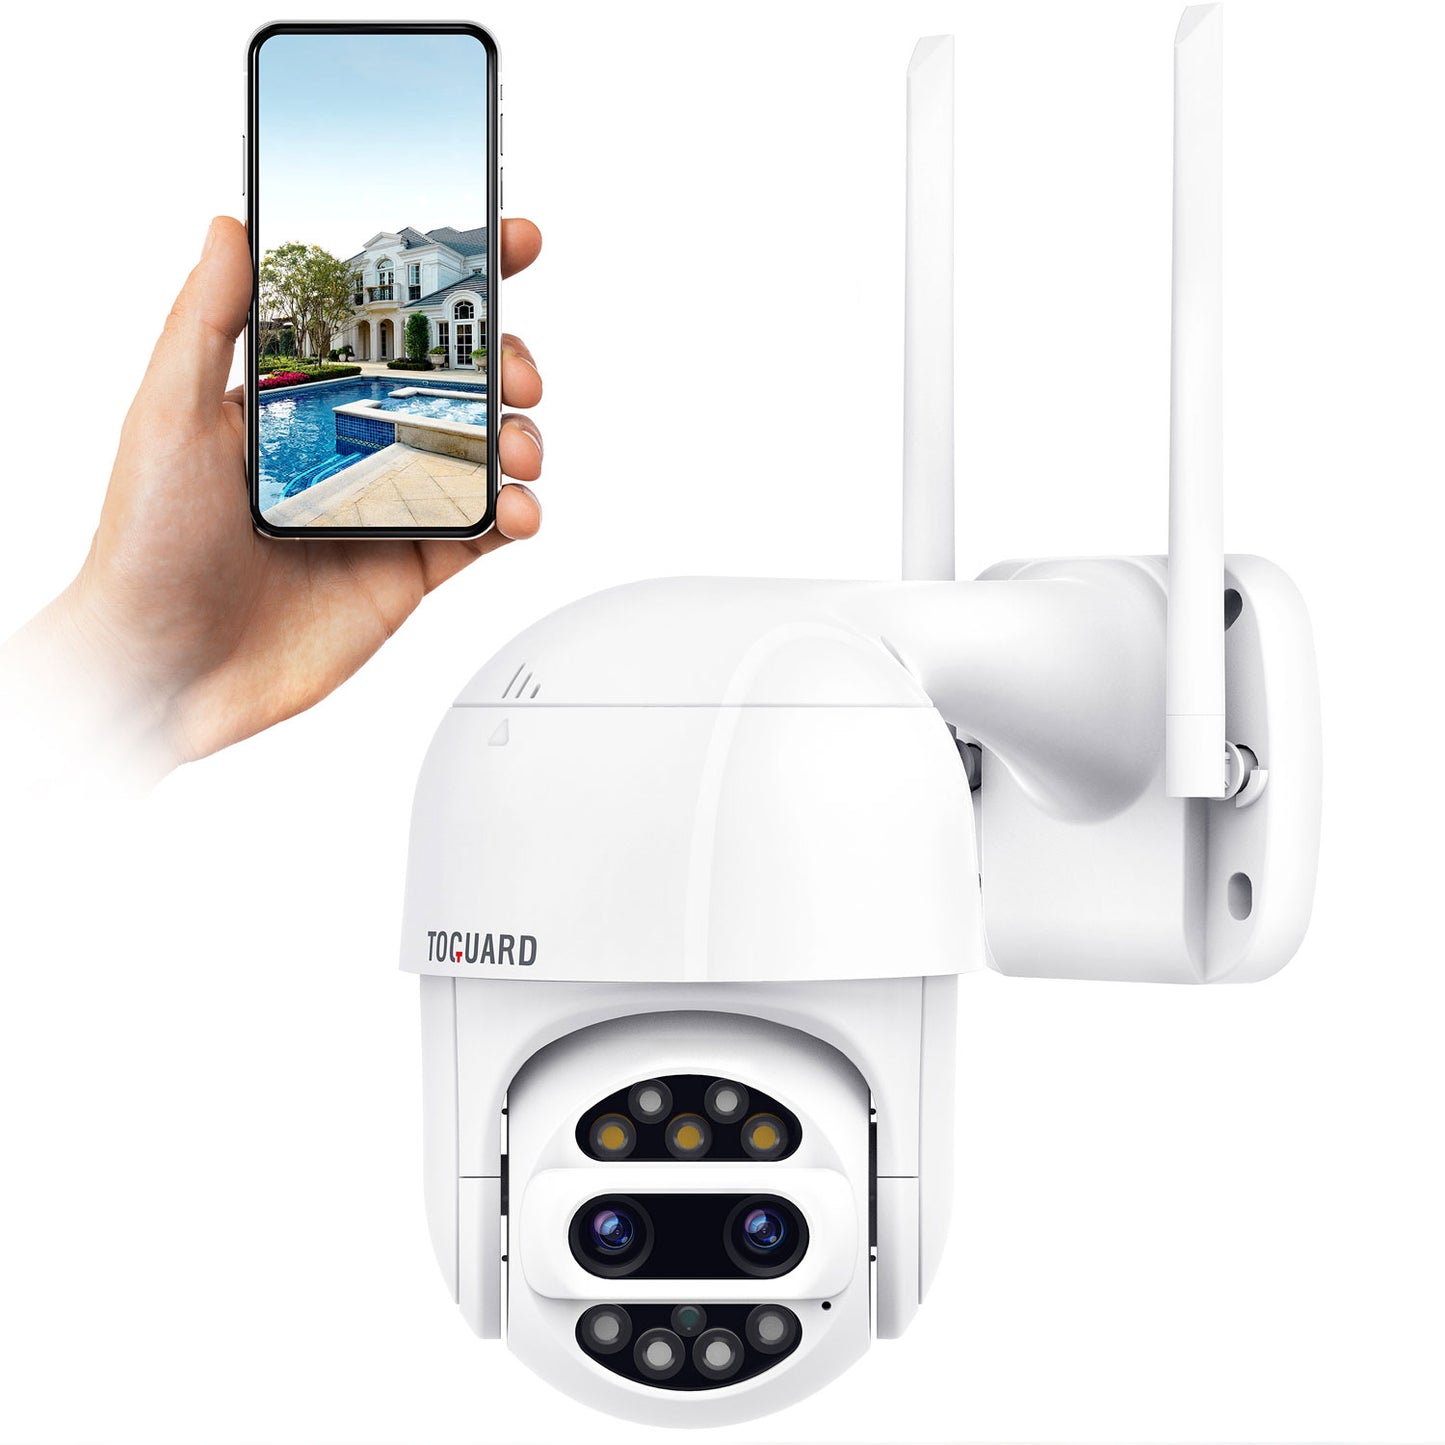 TOGUARD Security Camera Outdoor, 360°View Pan-Tilt Home Surveillance Camera with 1080P Dual Lens, 2-Way Audio, Color Night Vision, Motion Detection, WiFi Weatherproof Camera Support SD Card